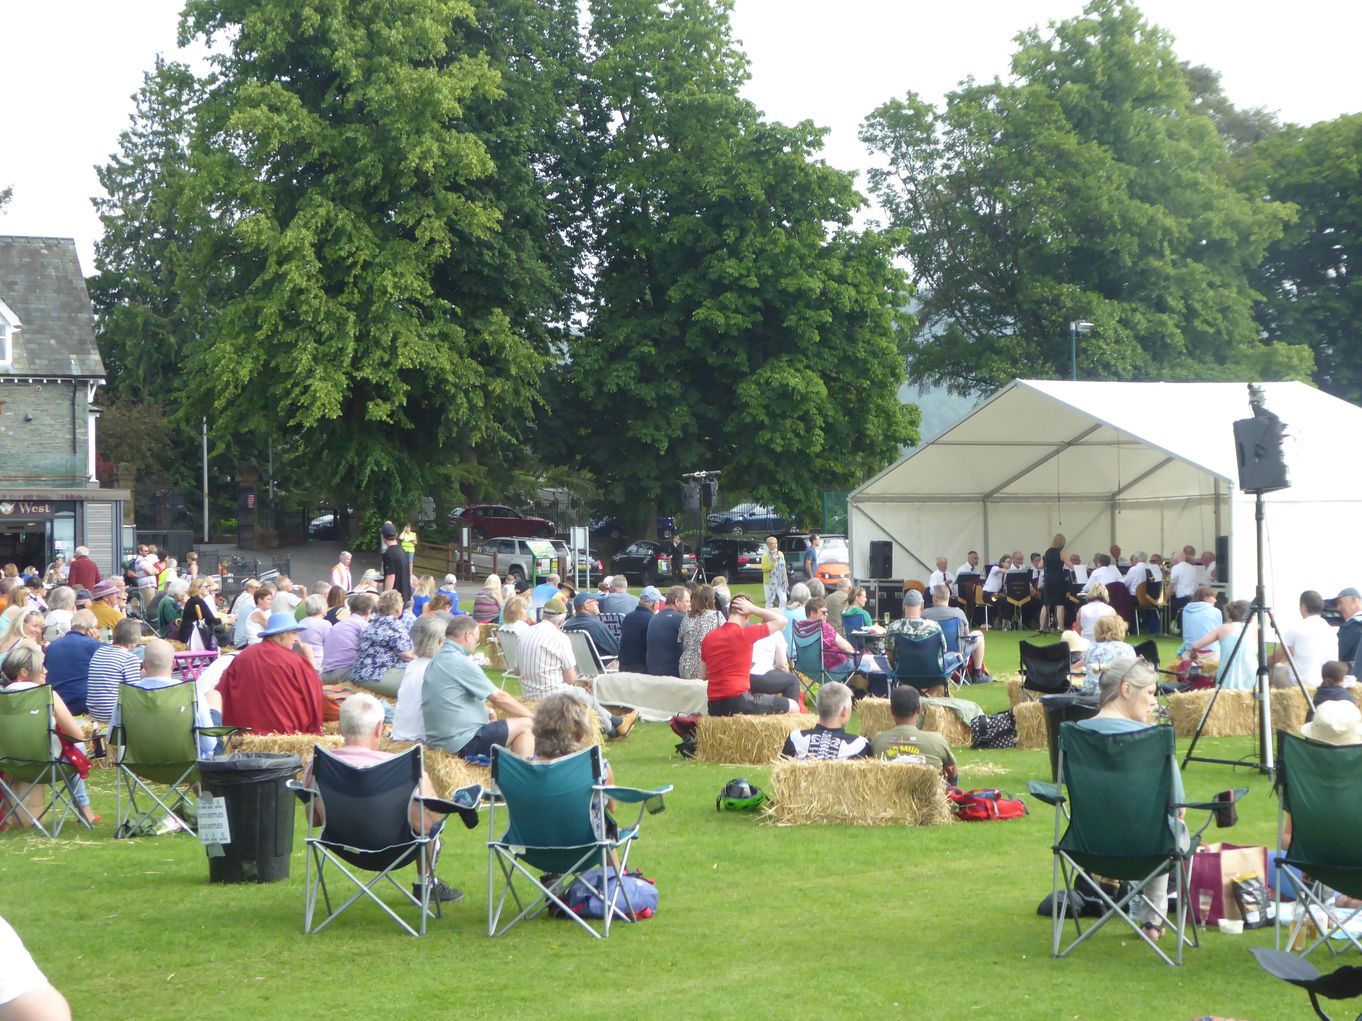 Audience enjoying music in the park